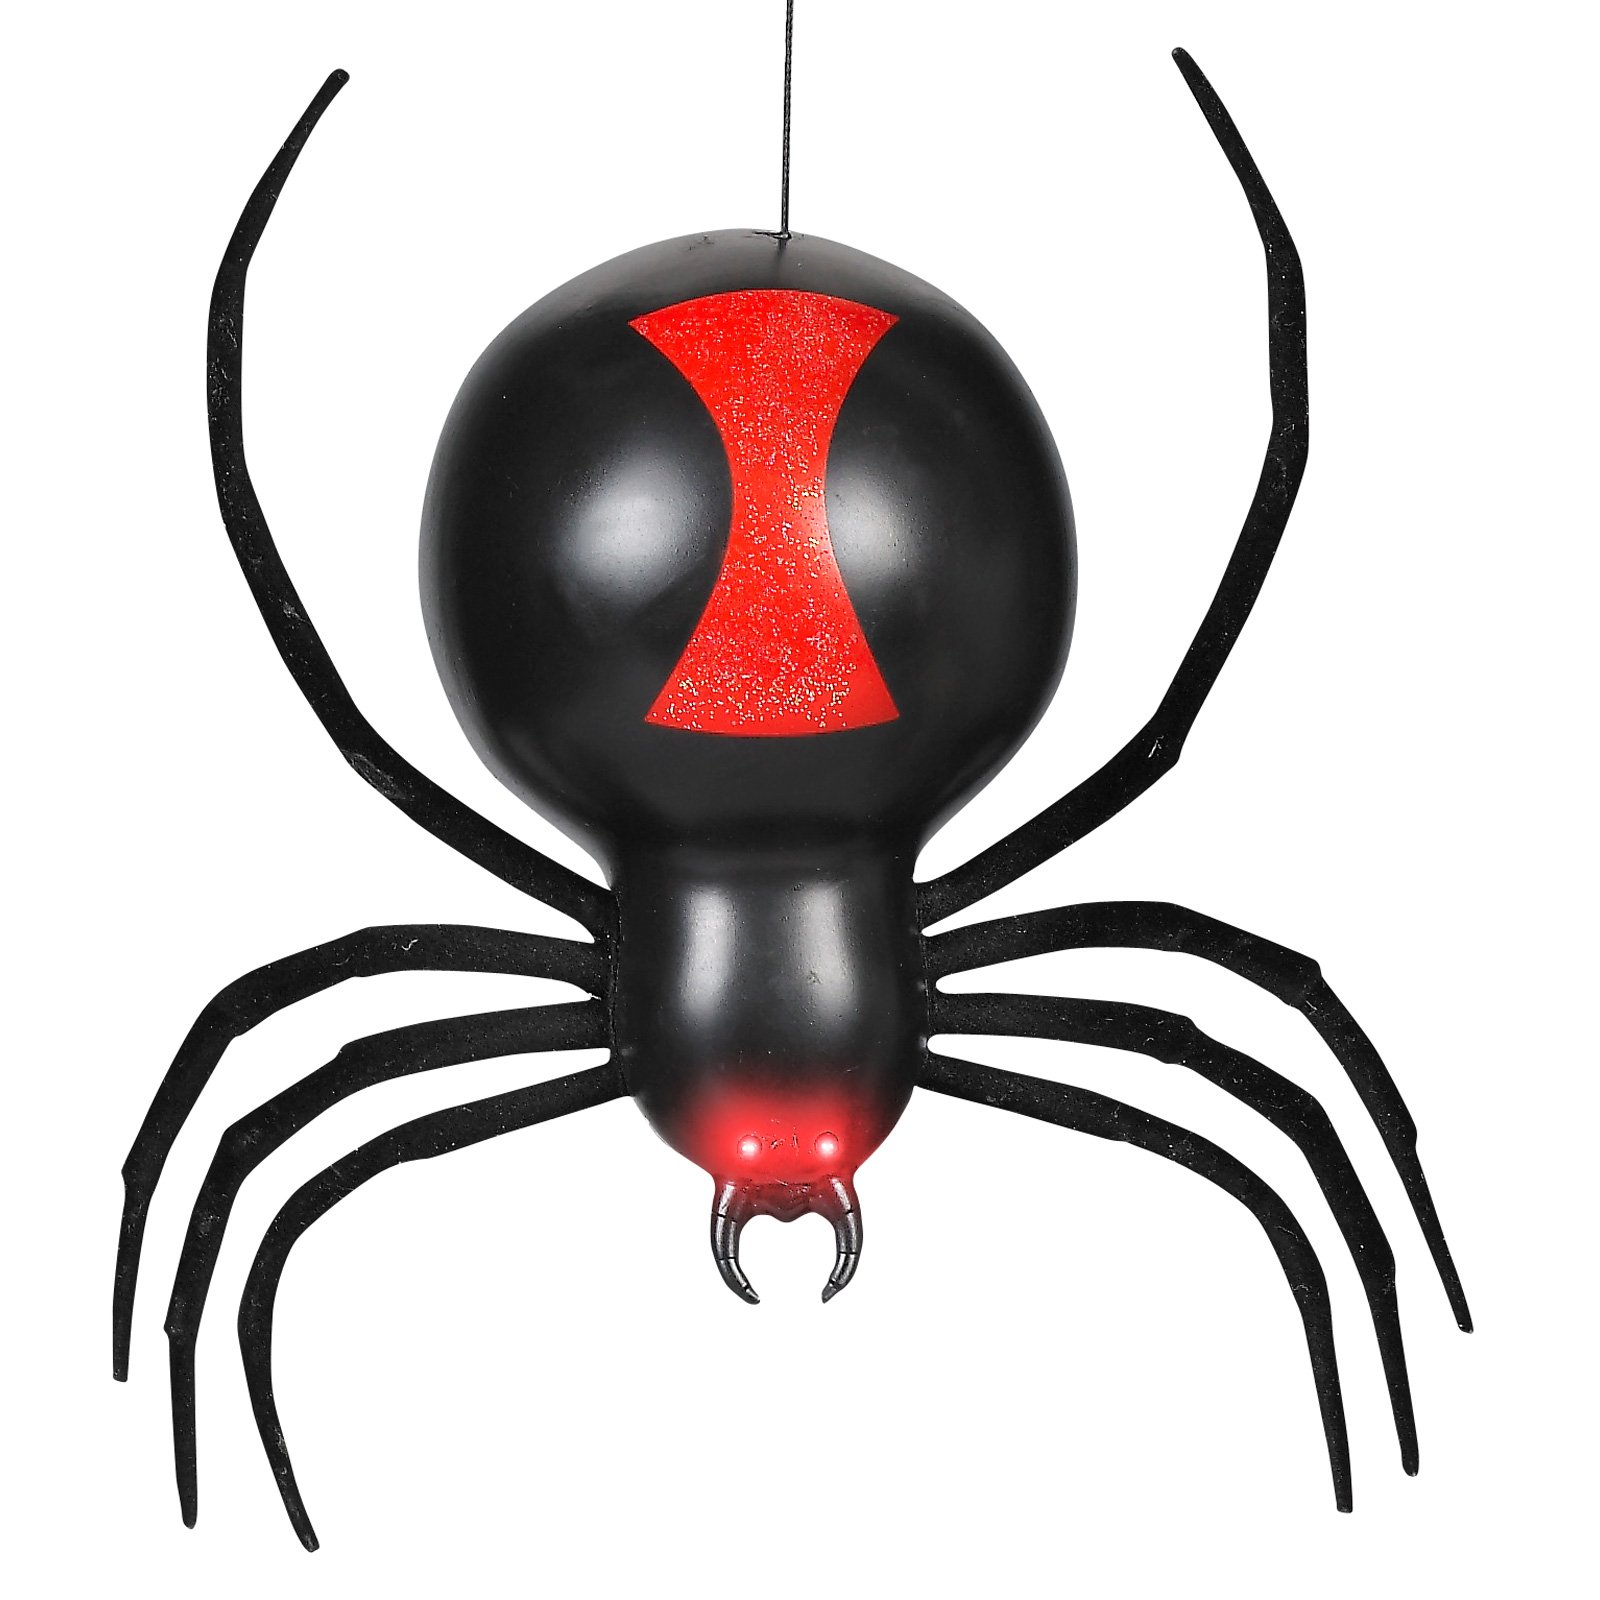 $16.16 Dropping Black Widow Spider Animated Prop at CostumesHut